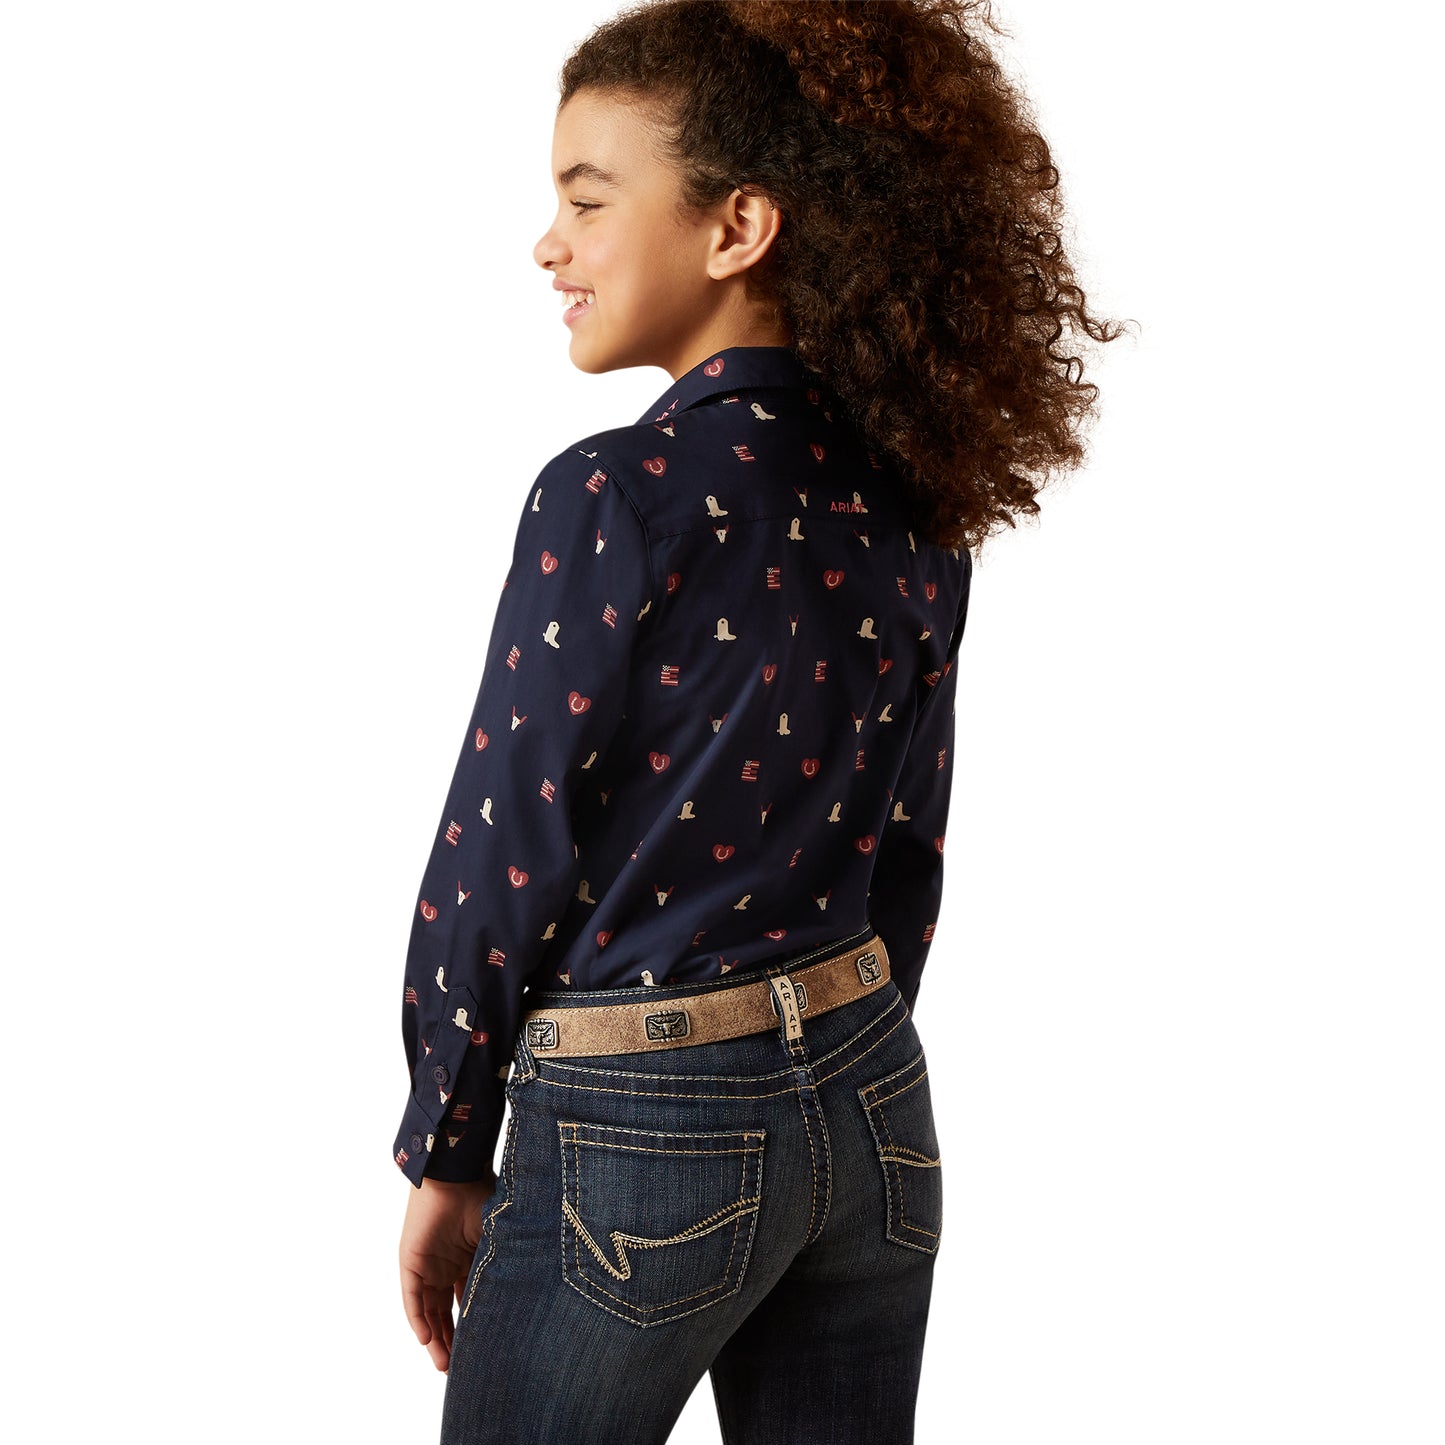 Ariat Youth Girl's Team Kirby Western Love Navy Blue Button Shirt 10046057